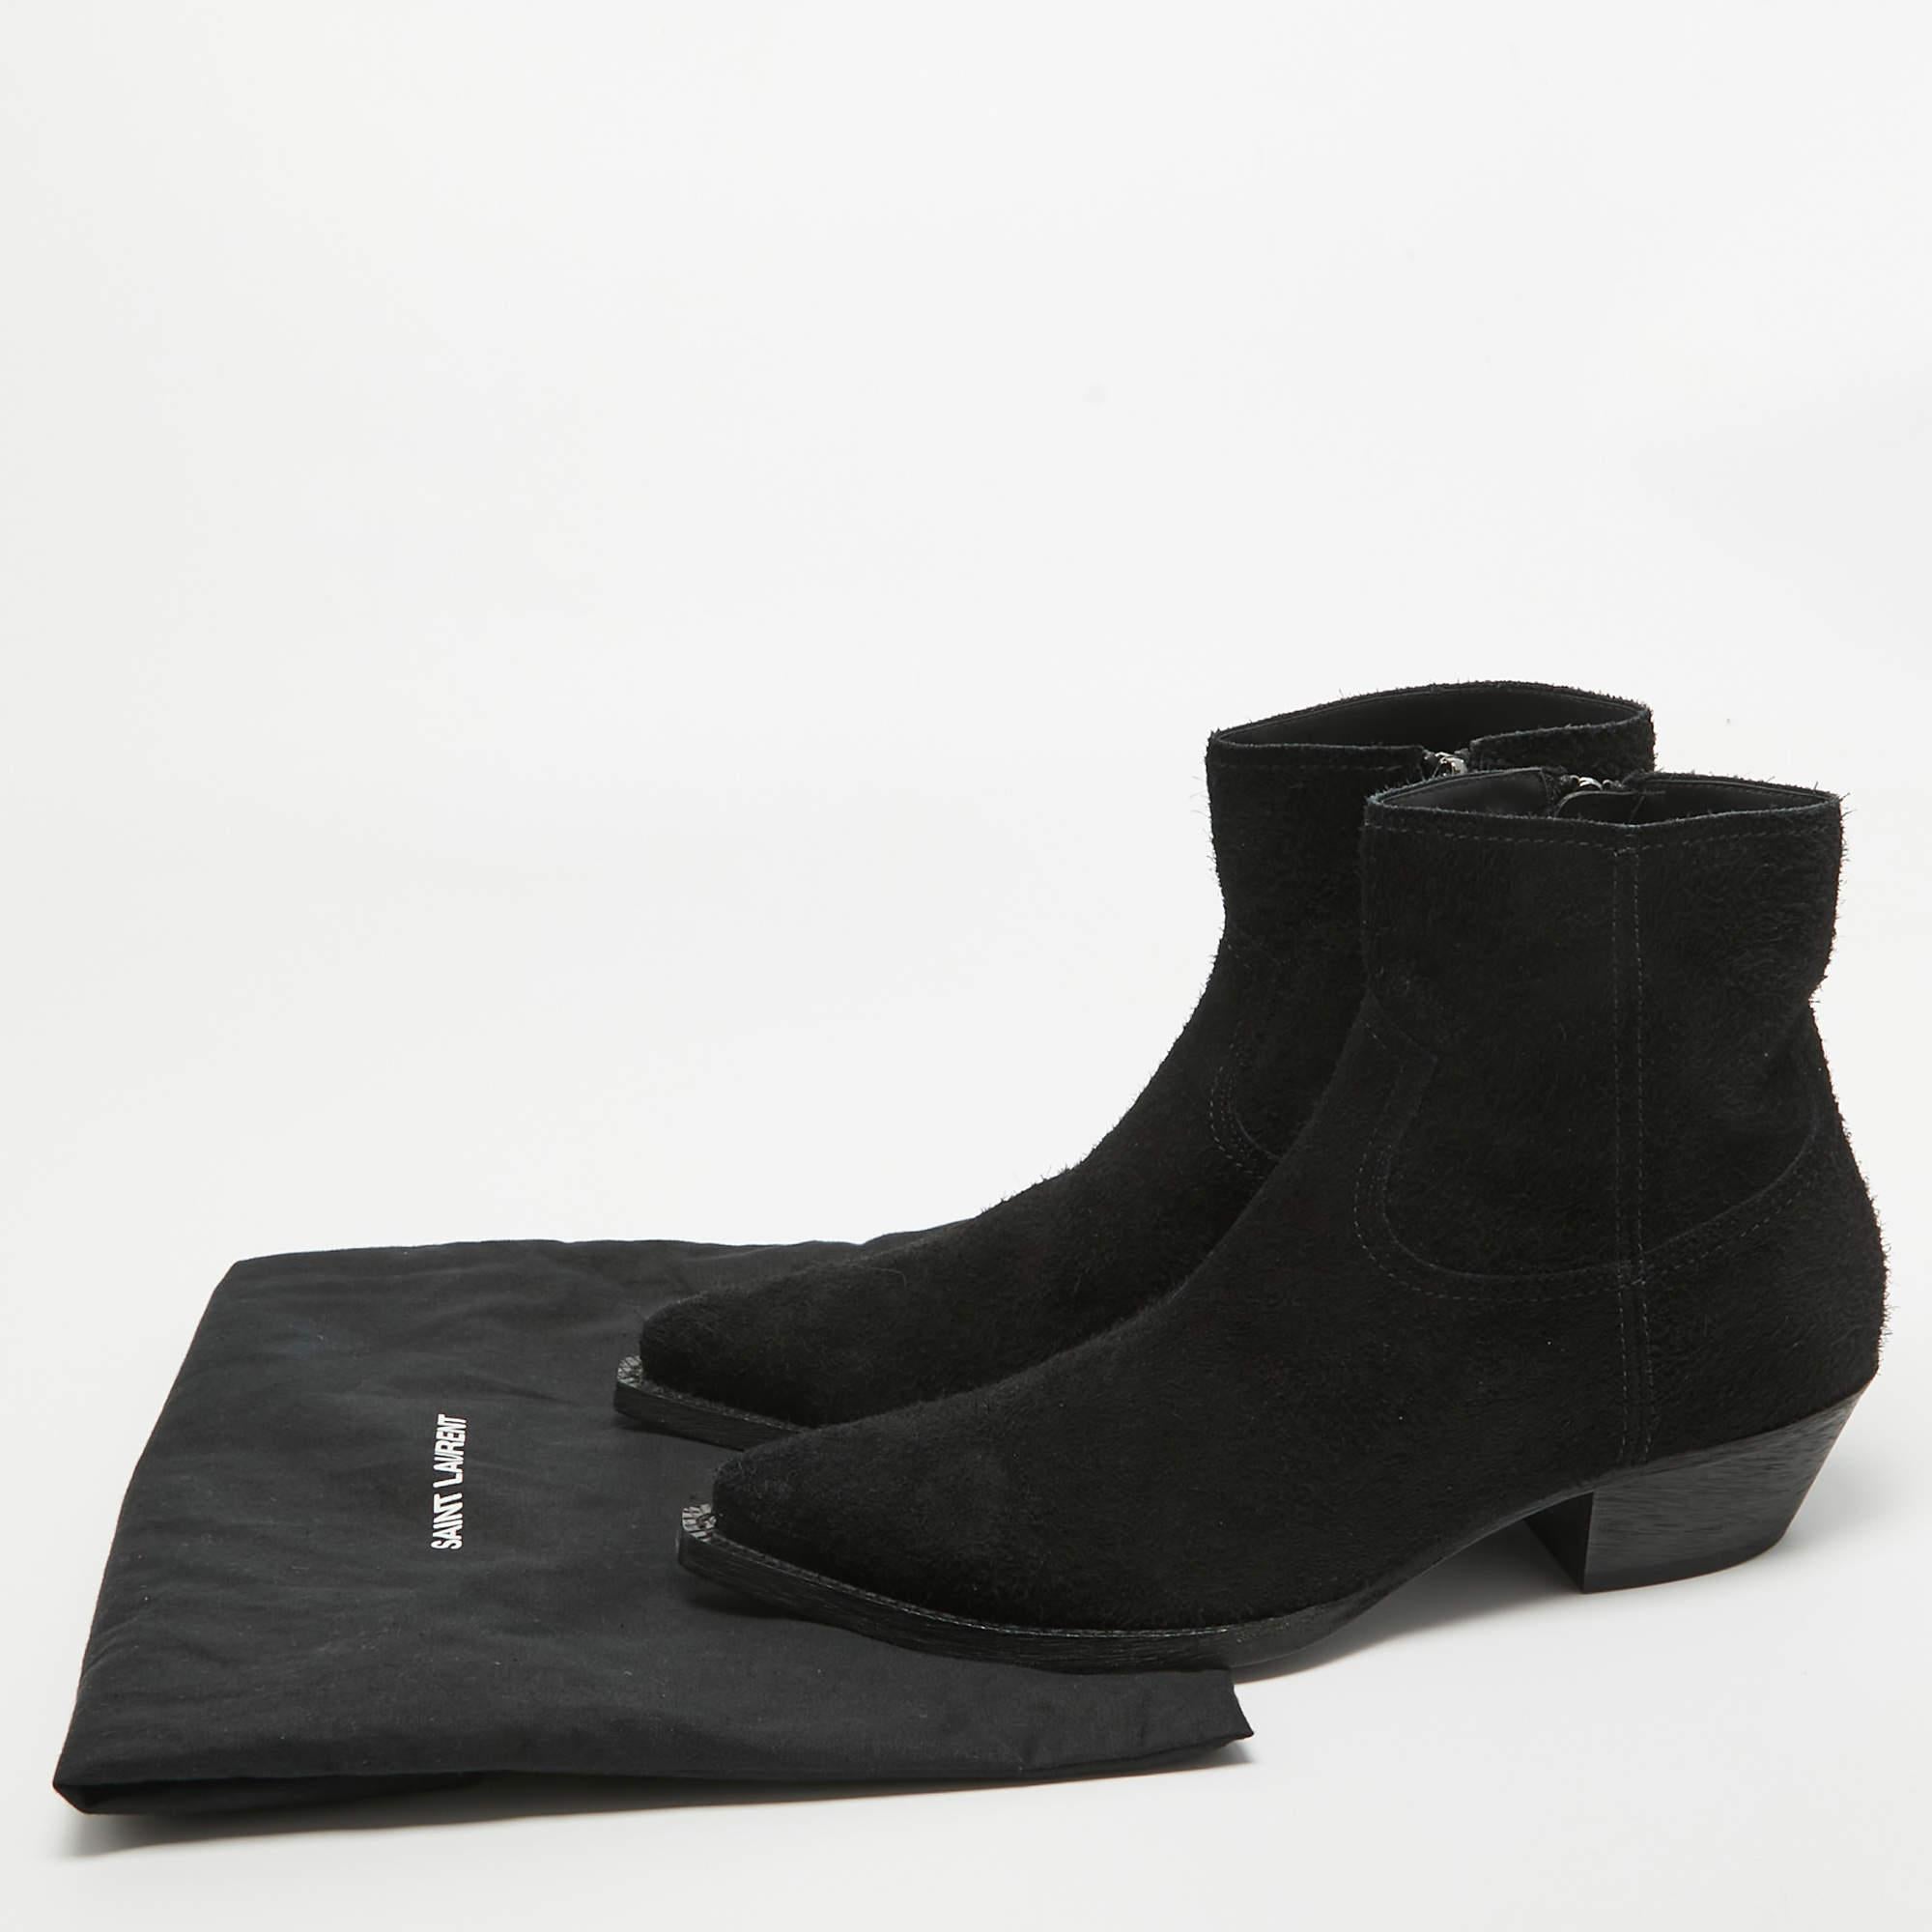 Saint Laurent Black Leather Pointed Toe Boots Size 43 For Sale 5